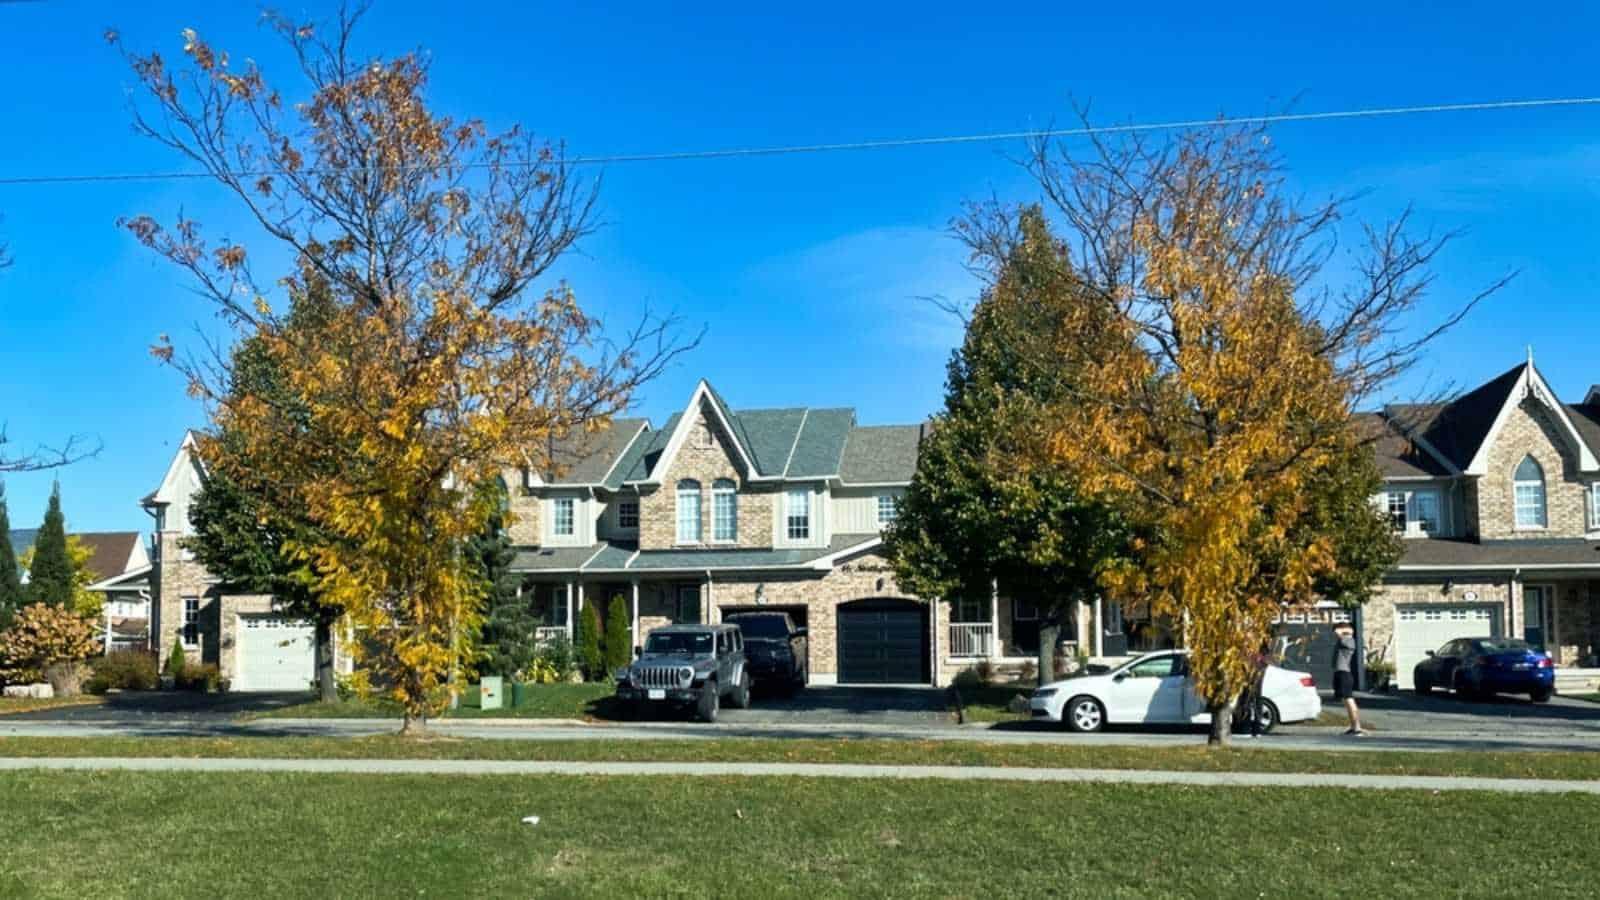 oshawa, canada - 23 October 2022: residential neighborhood with houses along road with trees around